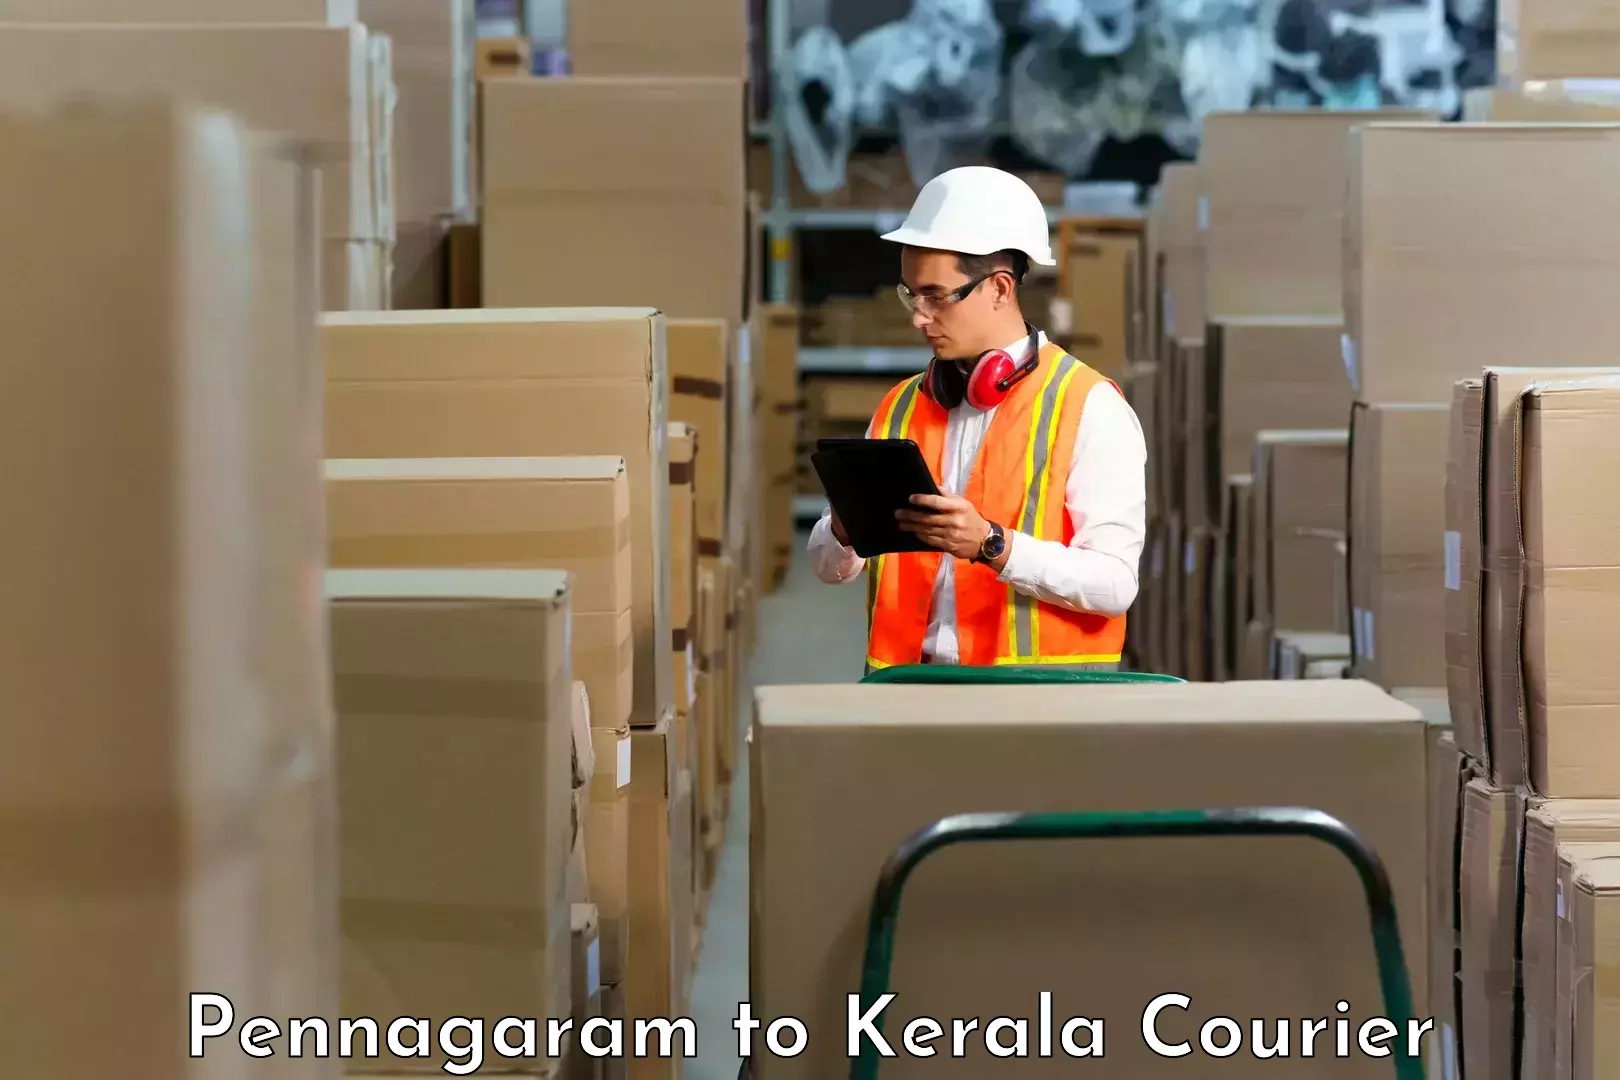 Parcel service for businesses Pennagaram to Panthalam